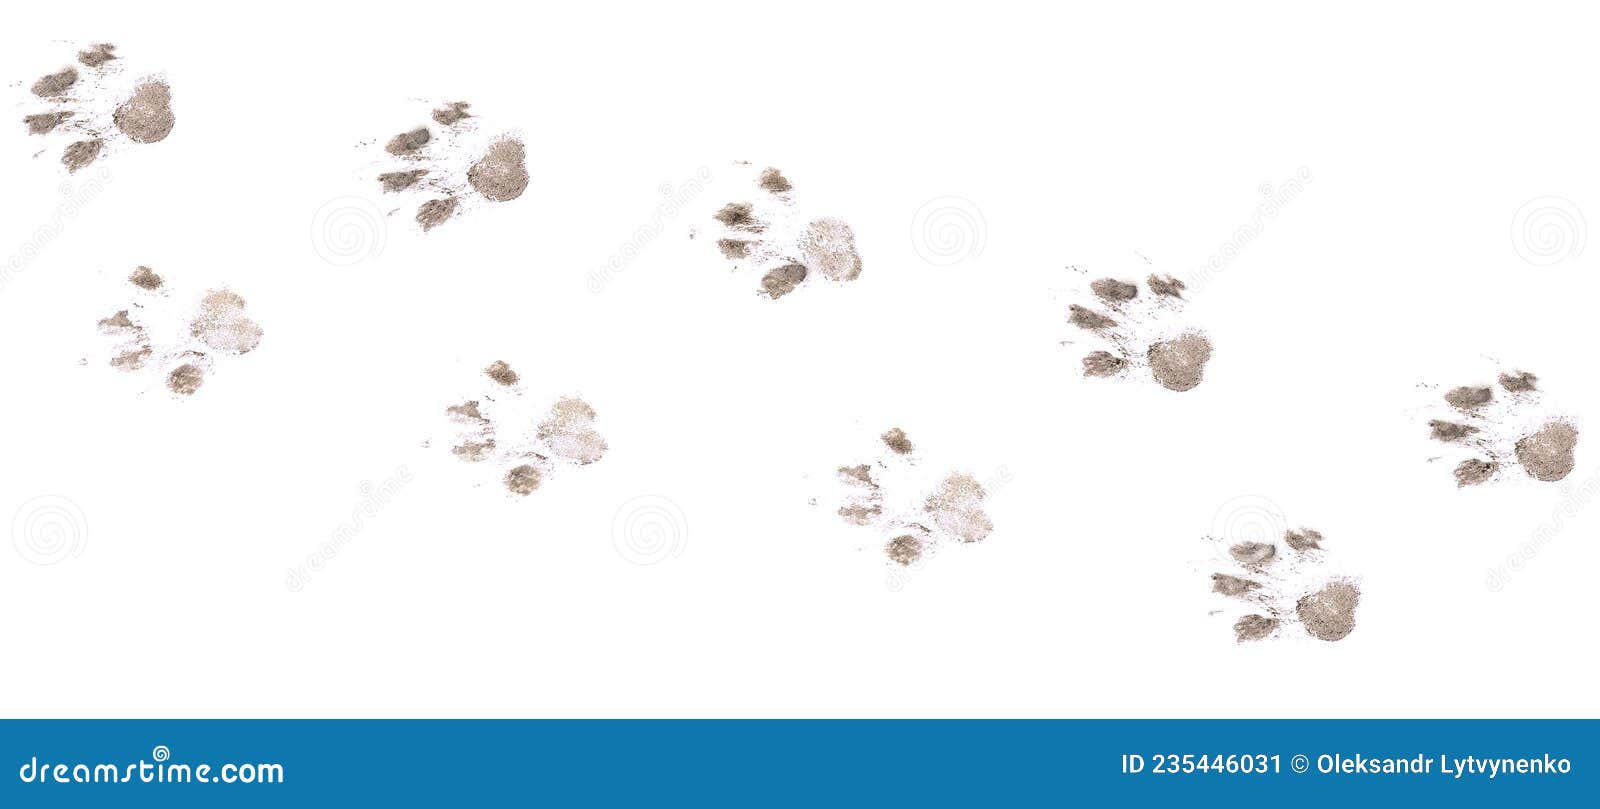 dog footprints on a white background